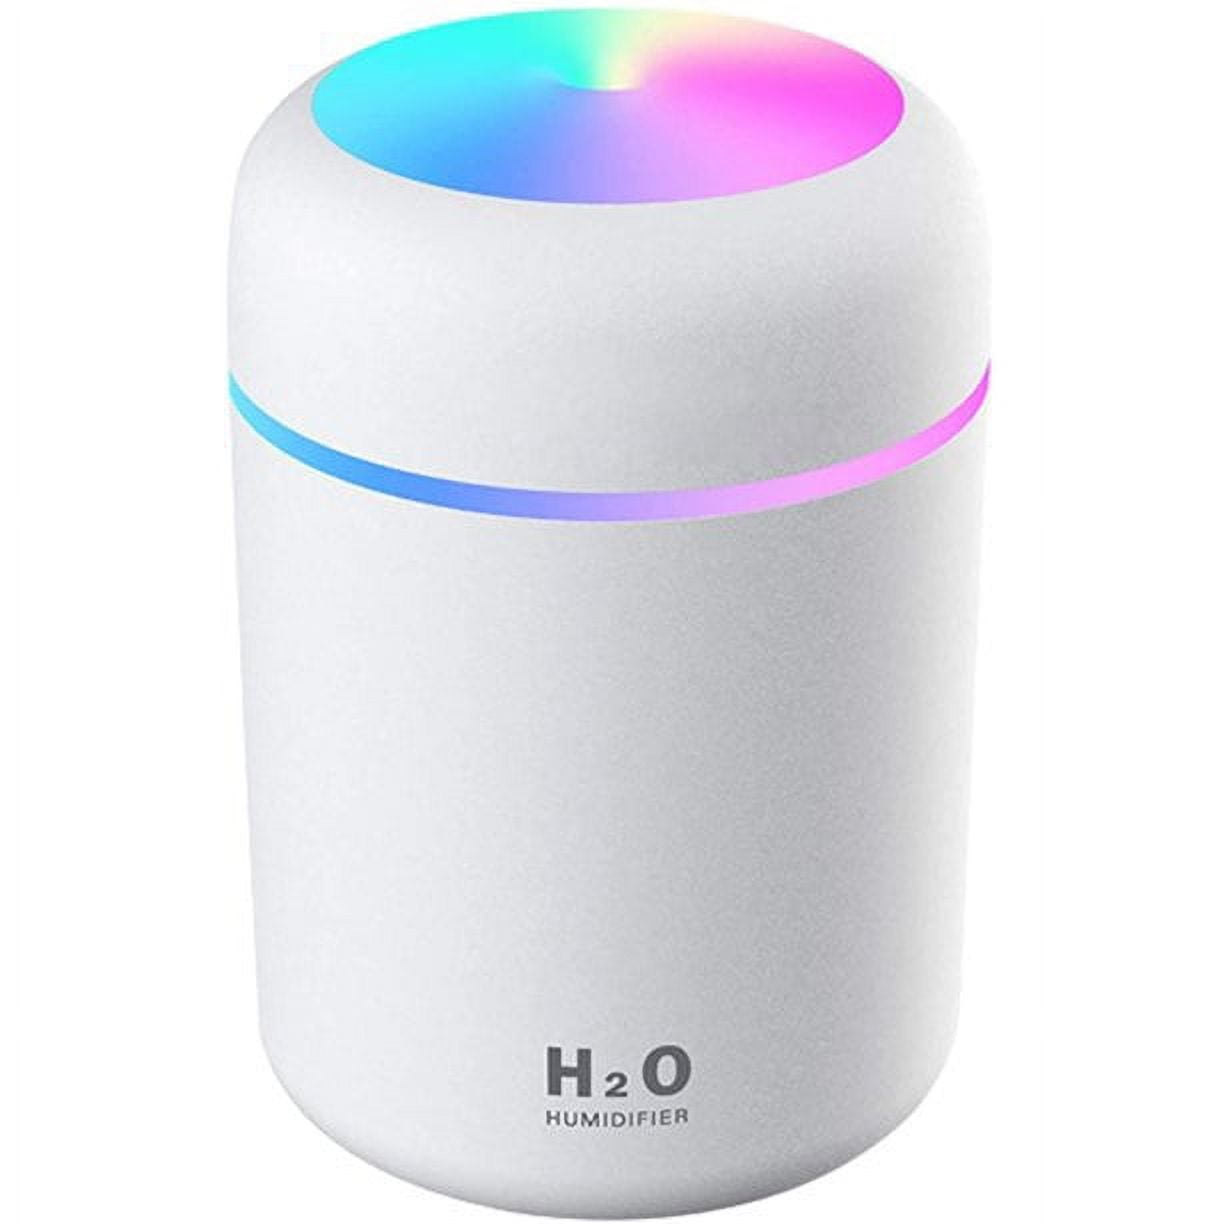 MINI Humidifier 220ML, Ultrasonic USB Desktop Mini Air Humidifier with USB  Interface, Color Night Light Function, Automatic Shutdown, Suitable for